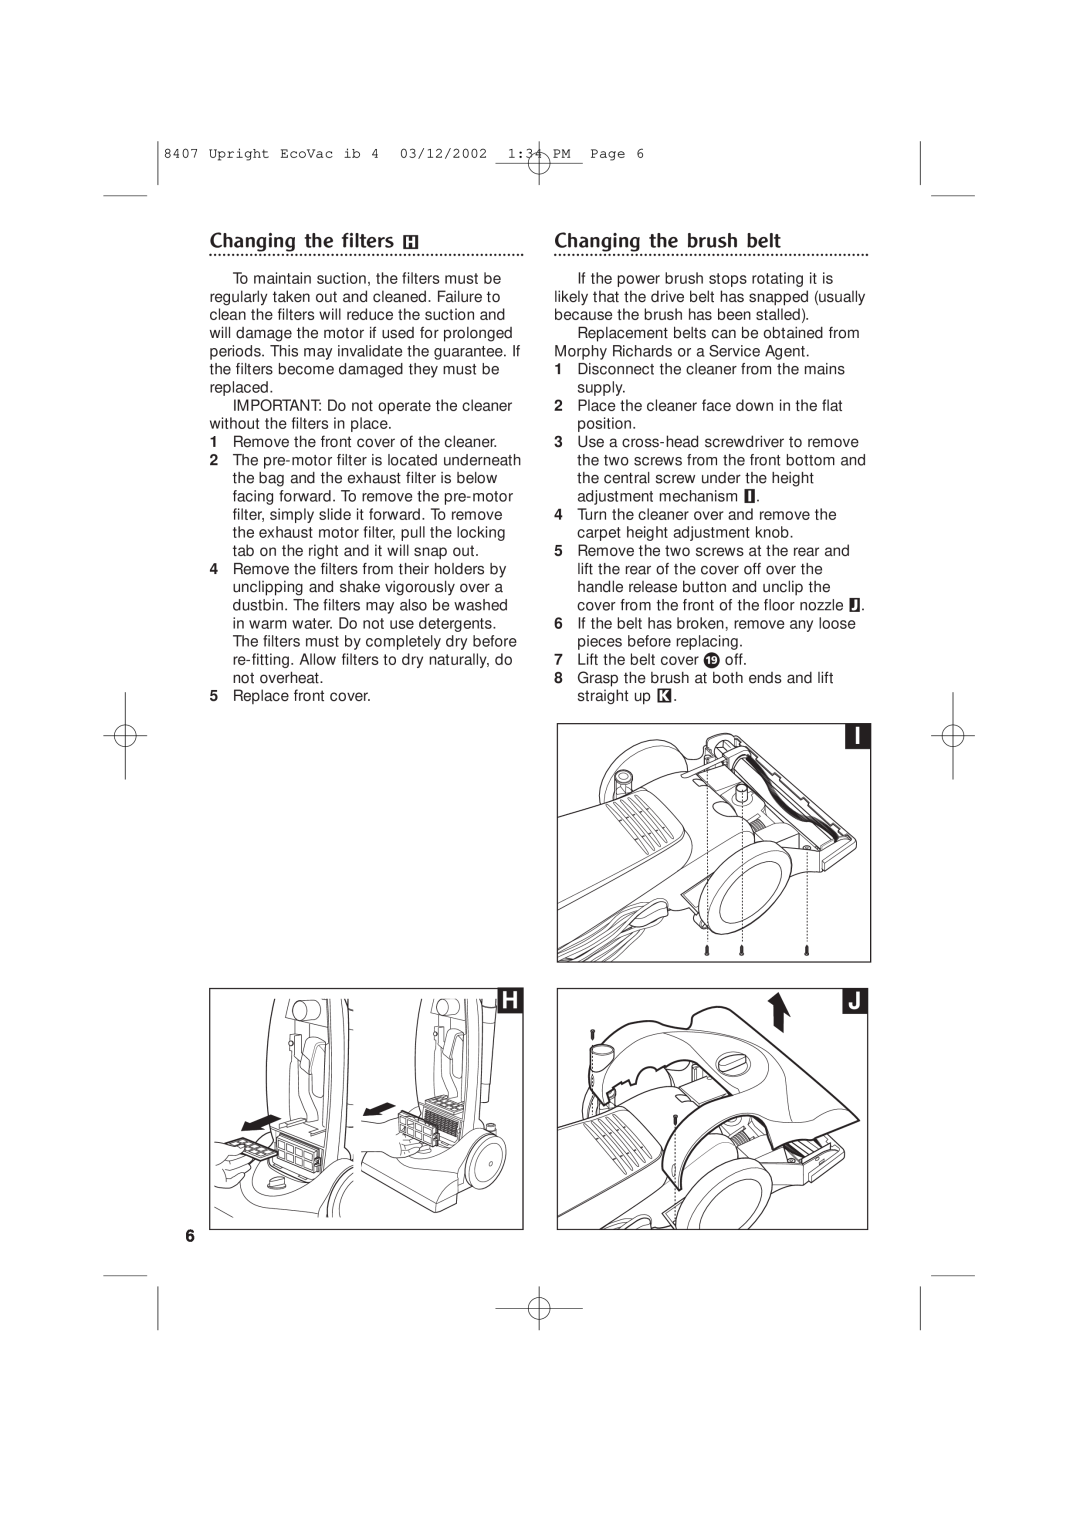 Morphy Richards Ecovac vacuum cleaner manual Changing the filters H, Changing the brush belt 